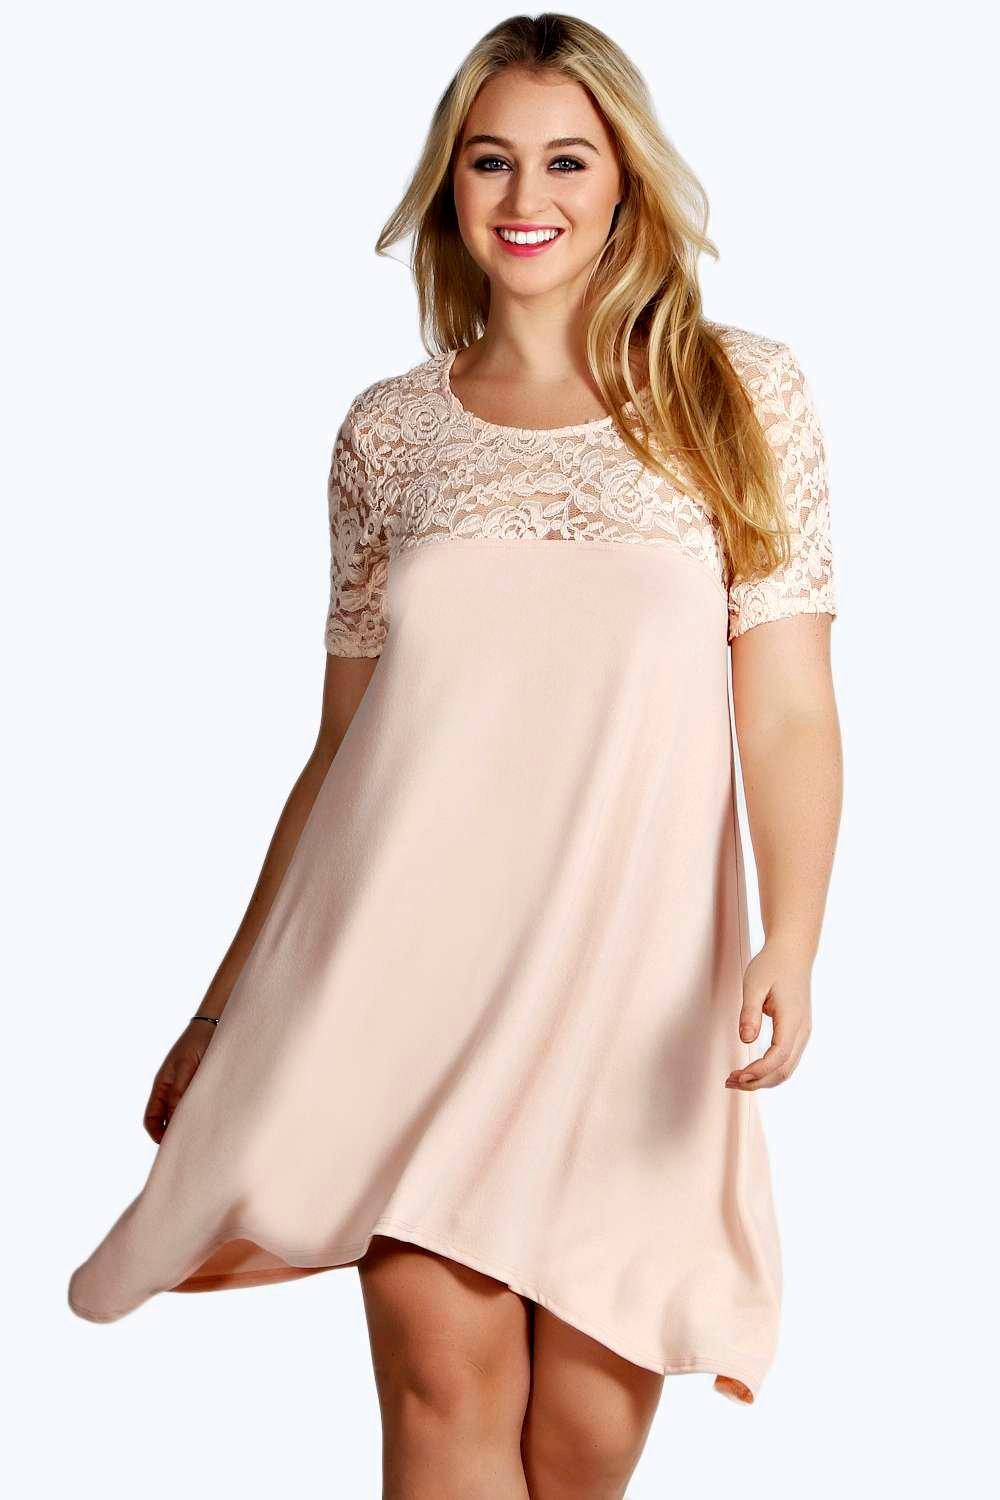 Plus Lucie Lace Panelled Swing Dress at boohoo.com